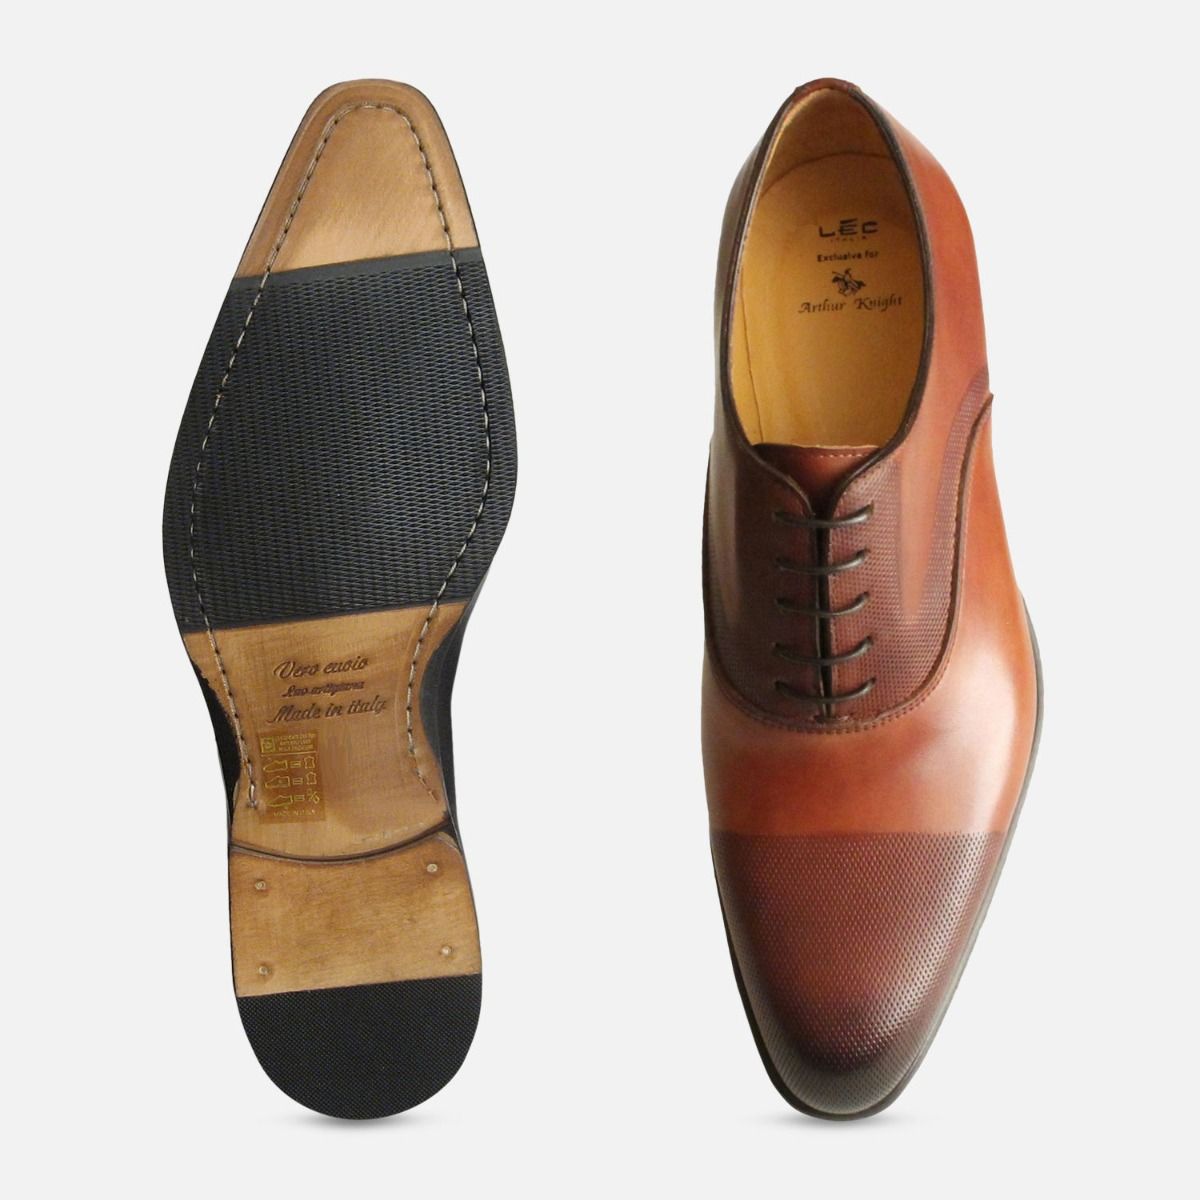 Executive Rich Brown Perforated Italian Oxford Shoes